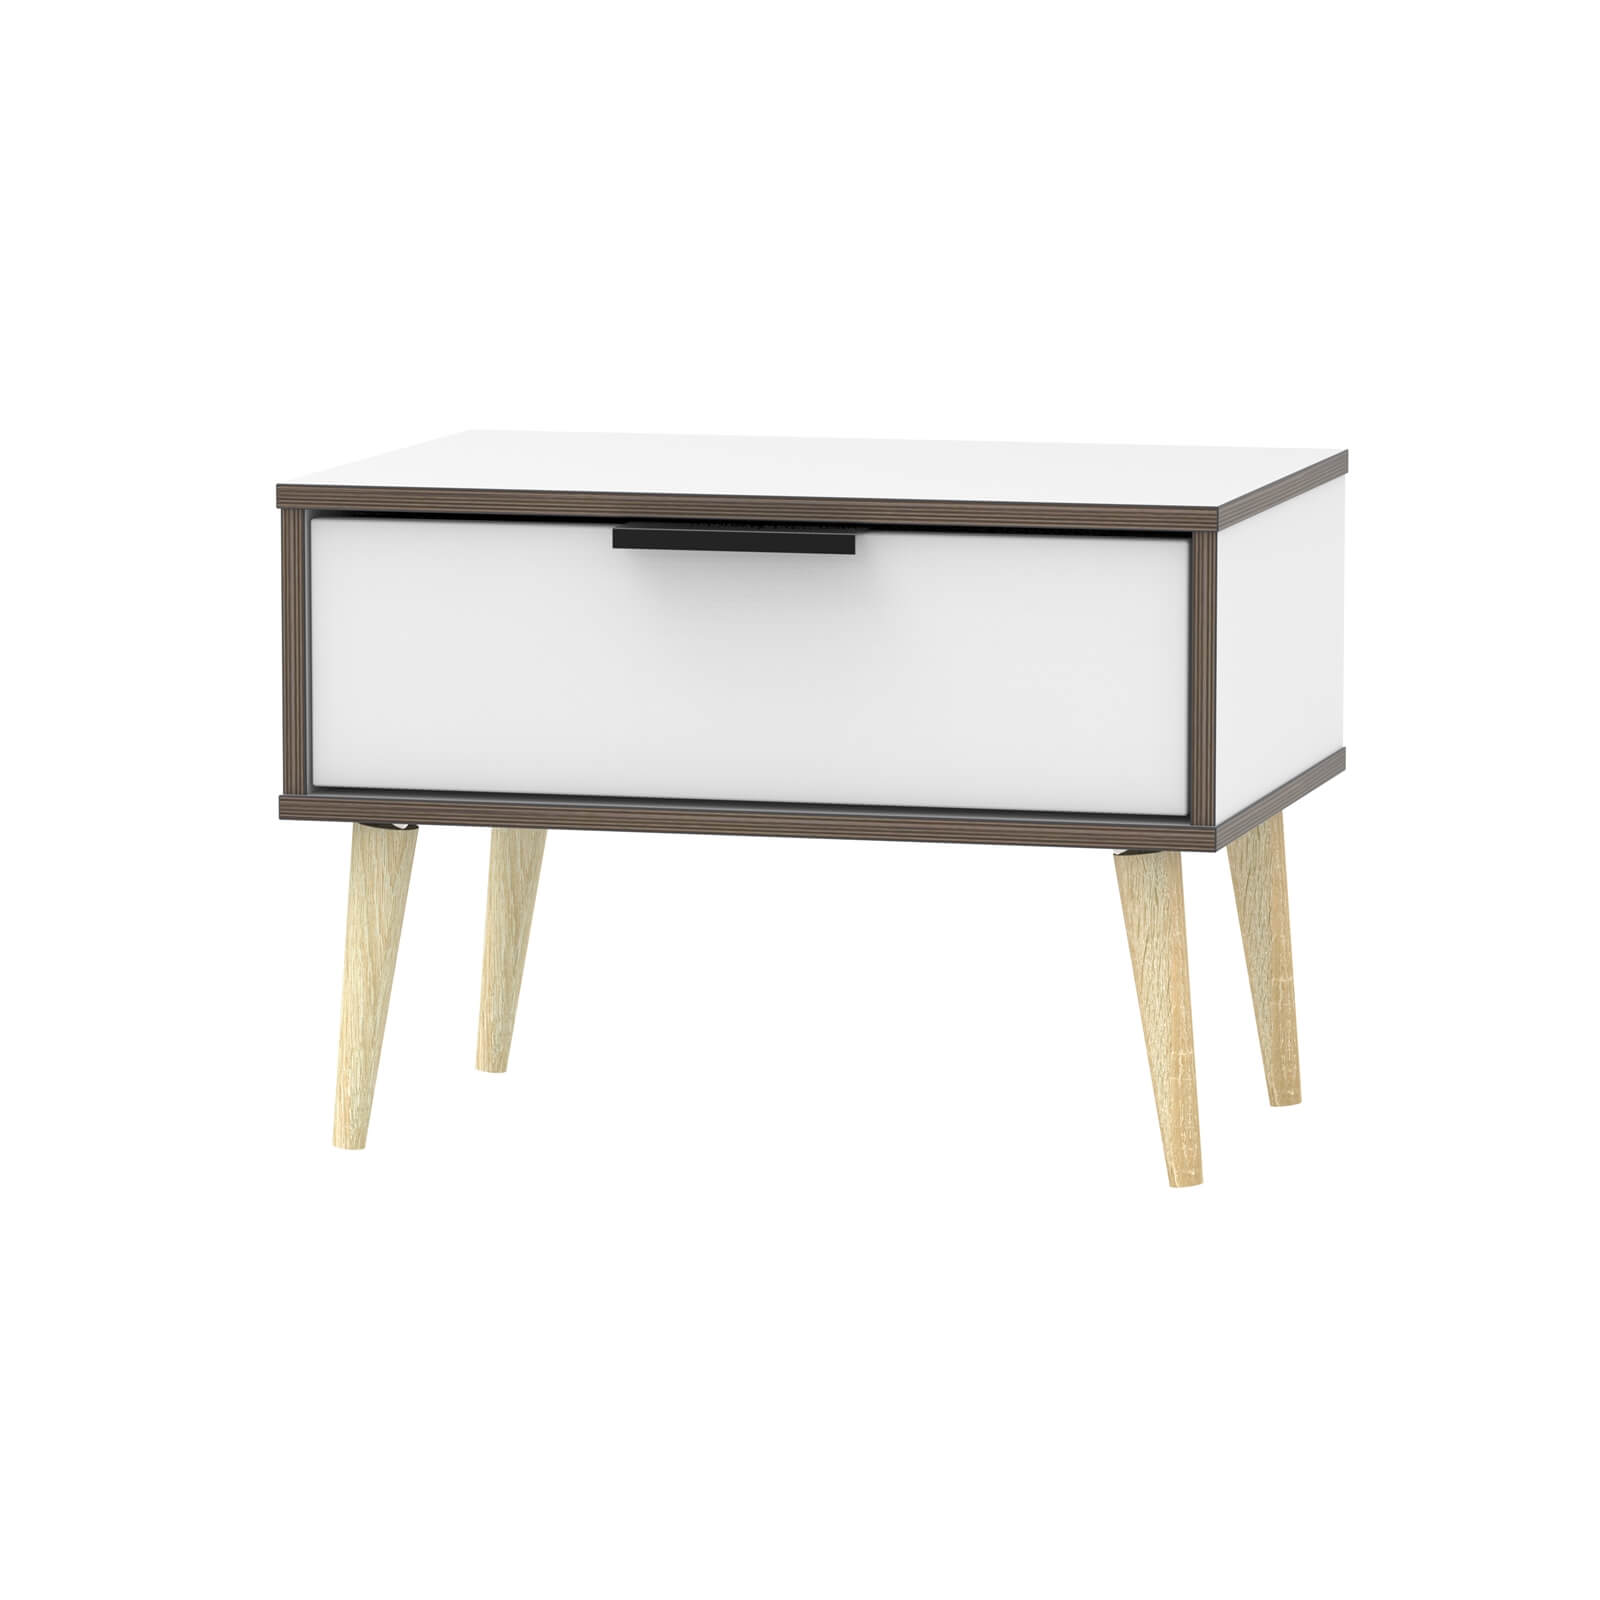 Tokyo 1 Drawer Bedside Table with Dark Edge - White